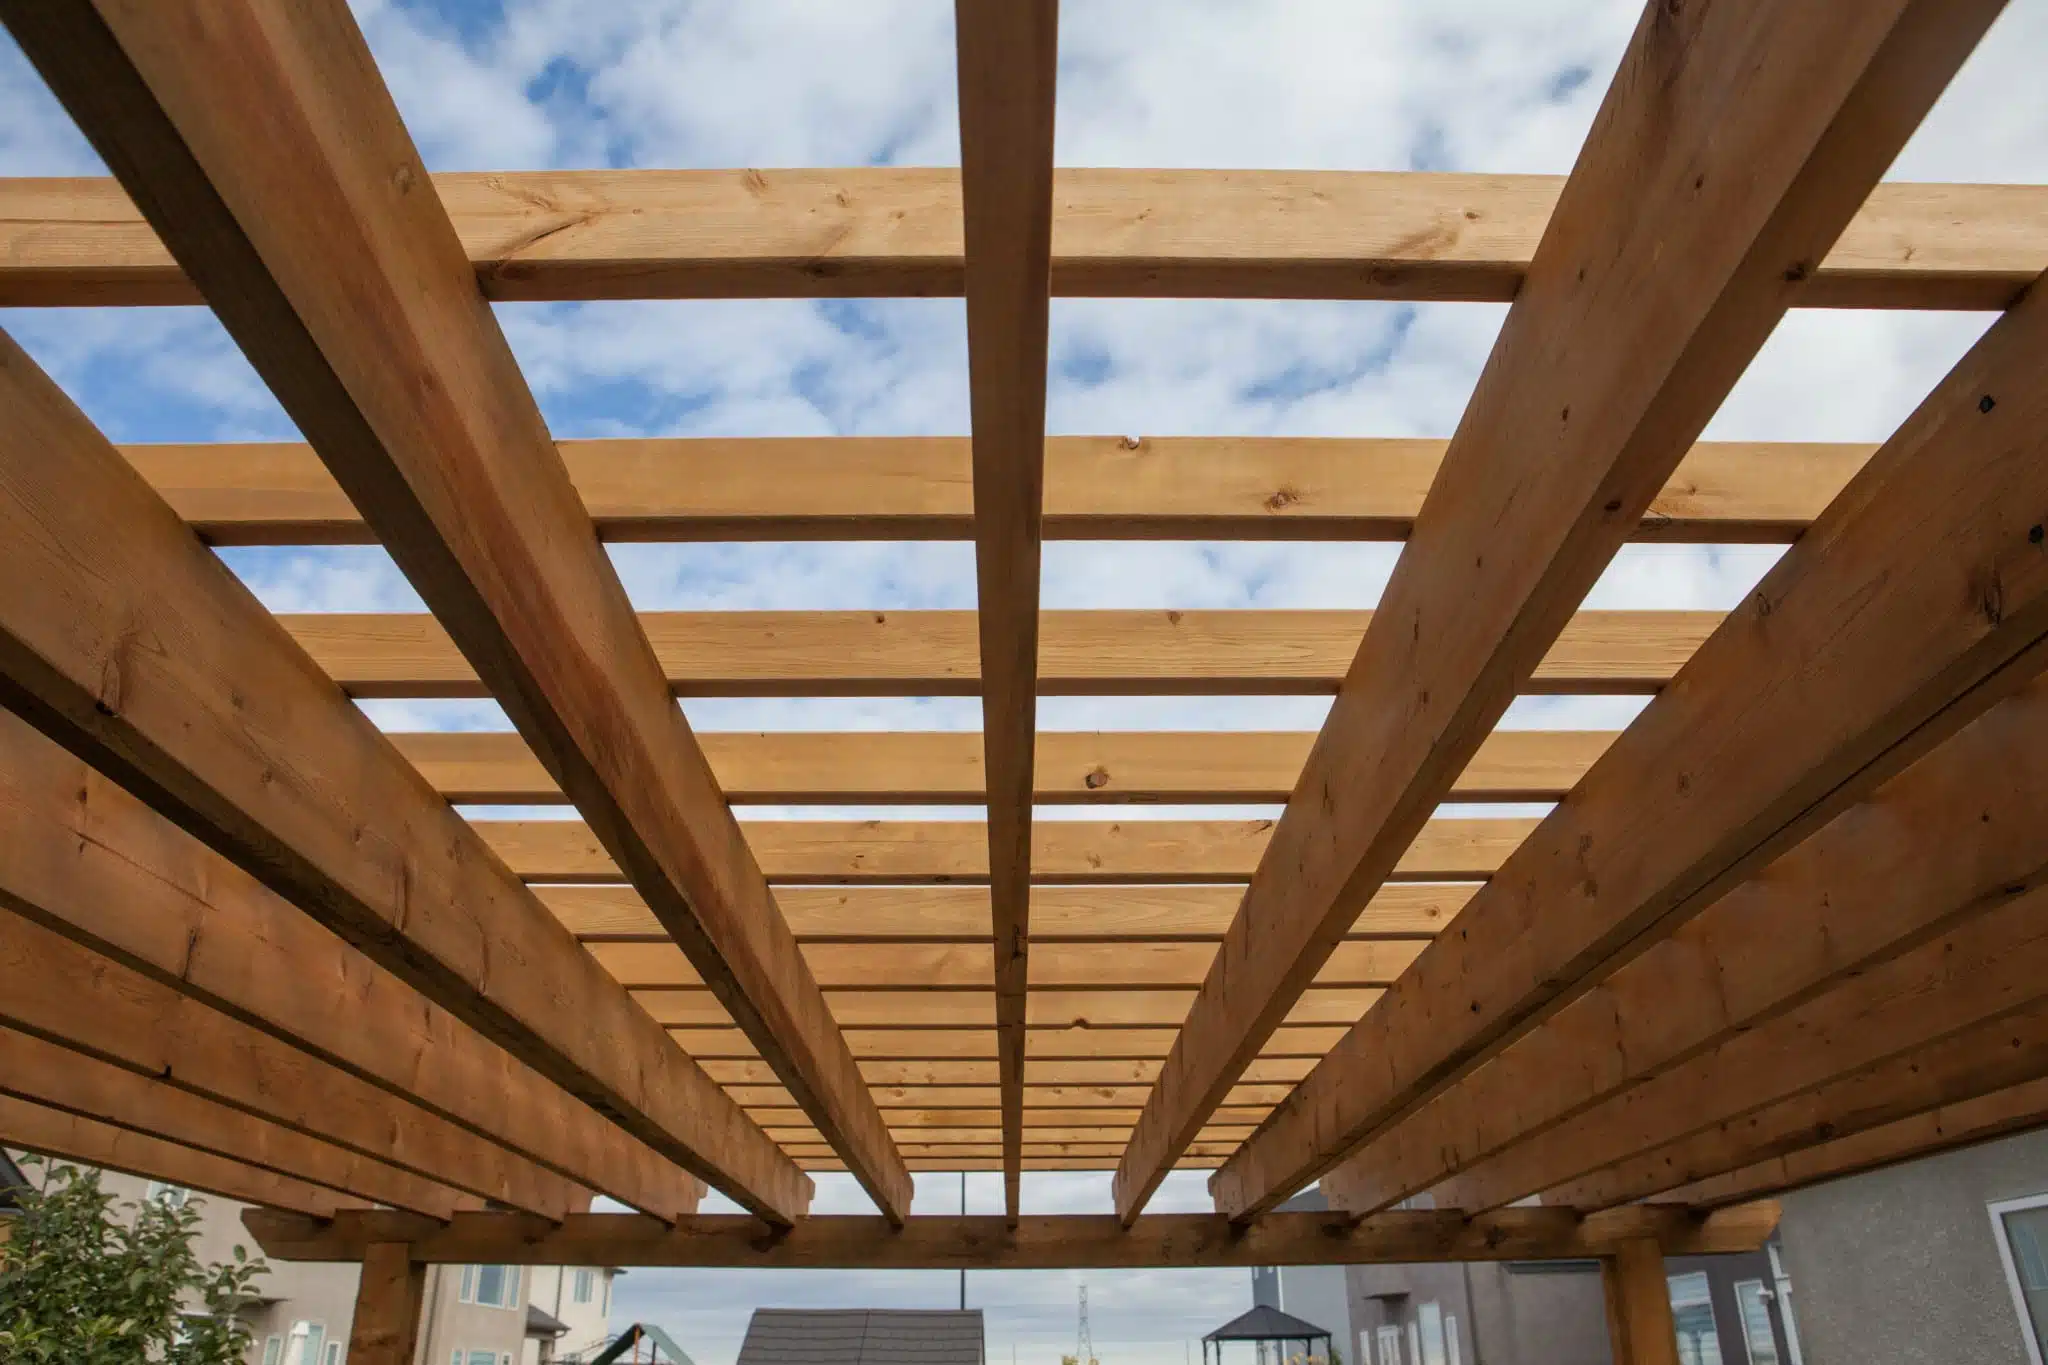 A wooden pergola with evenly spaced rafters against a blue sky with white clouds
